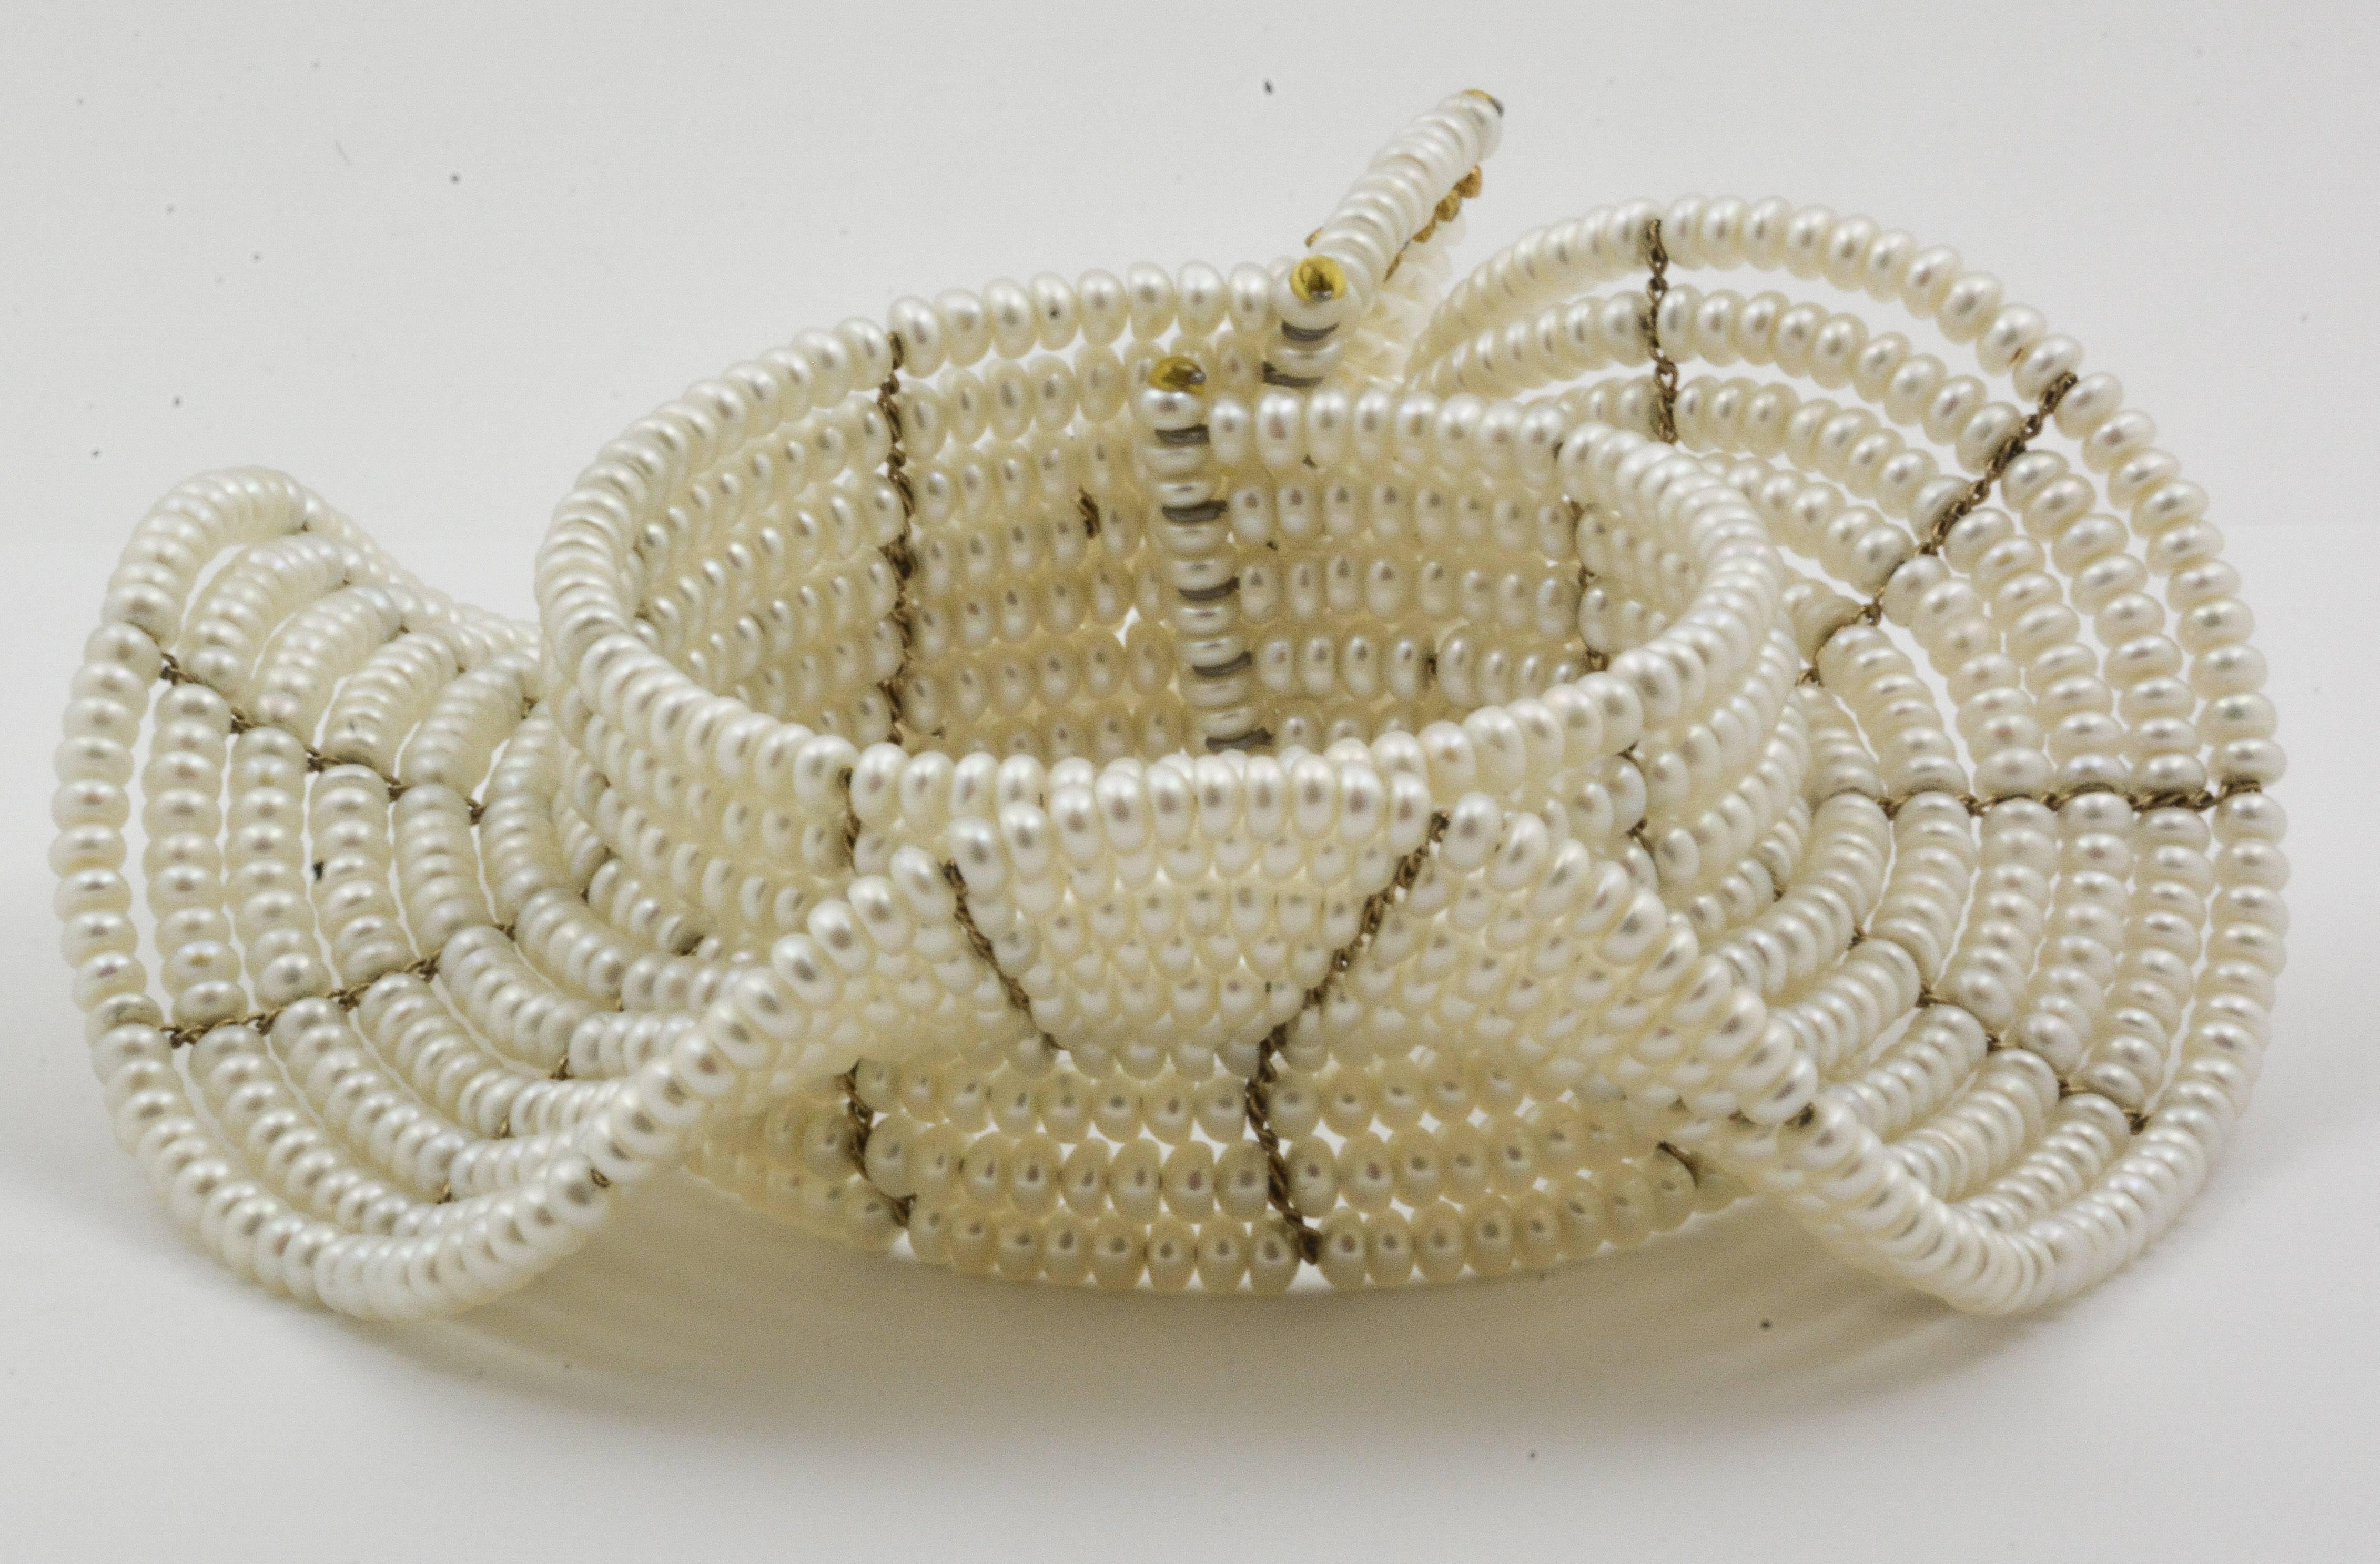 Women's Cuff Seven Row Cultured Pearl Bracelet with Ruffle